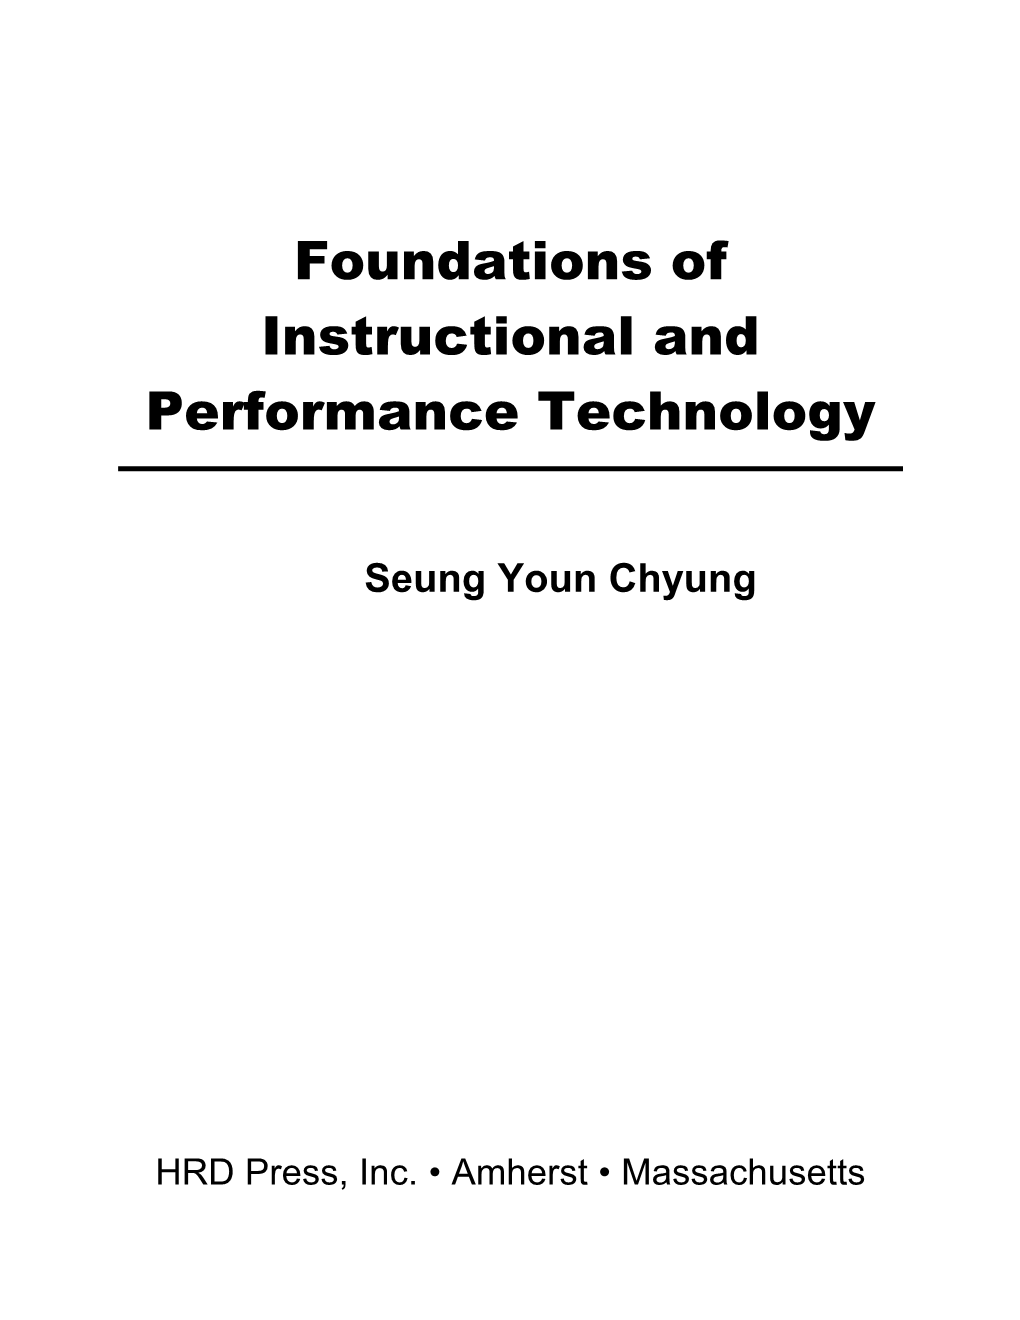 Foundations of Instructional and Performance Technology